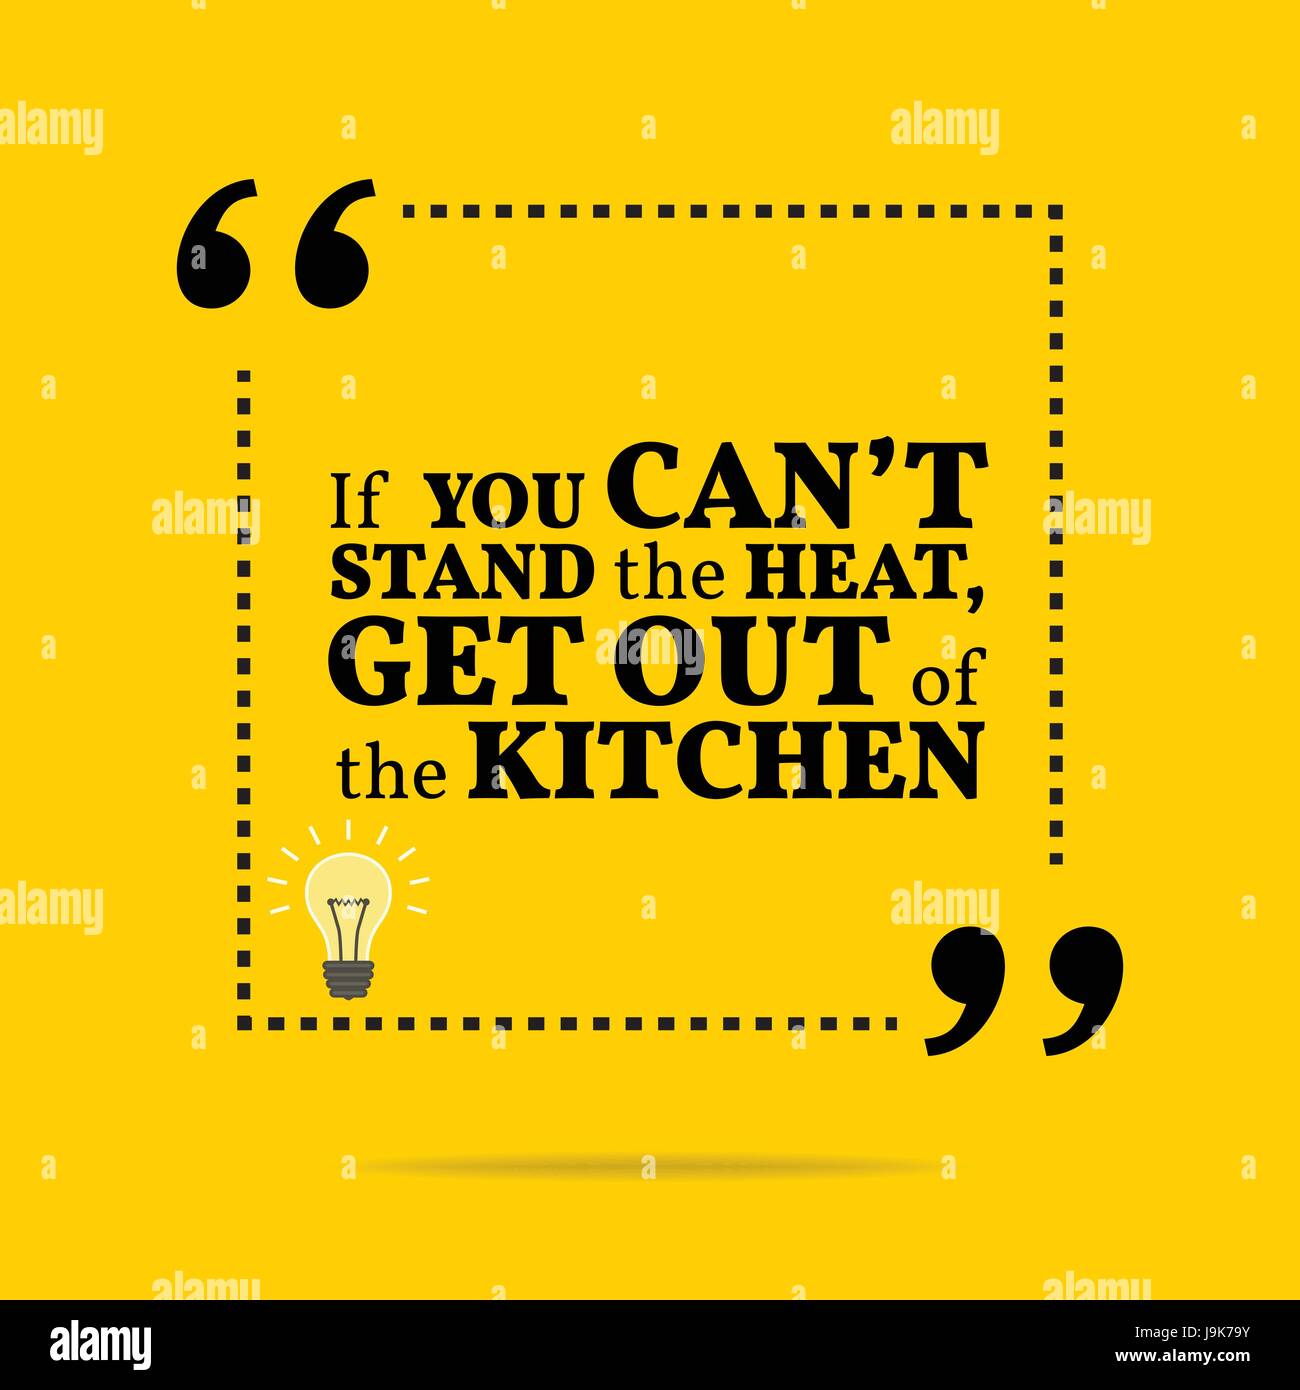 Inspirational motivational quote. If you can't stand the heat, get out of the kitchen. Simple trendy design. Stock Vector